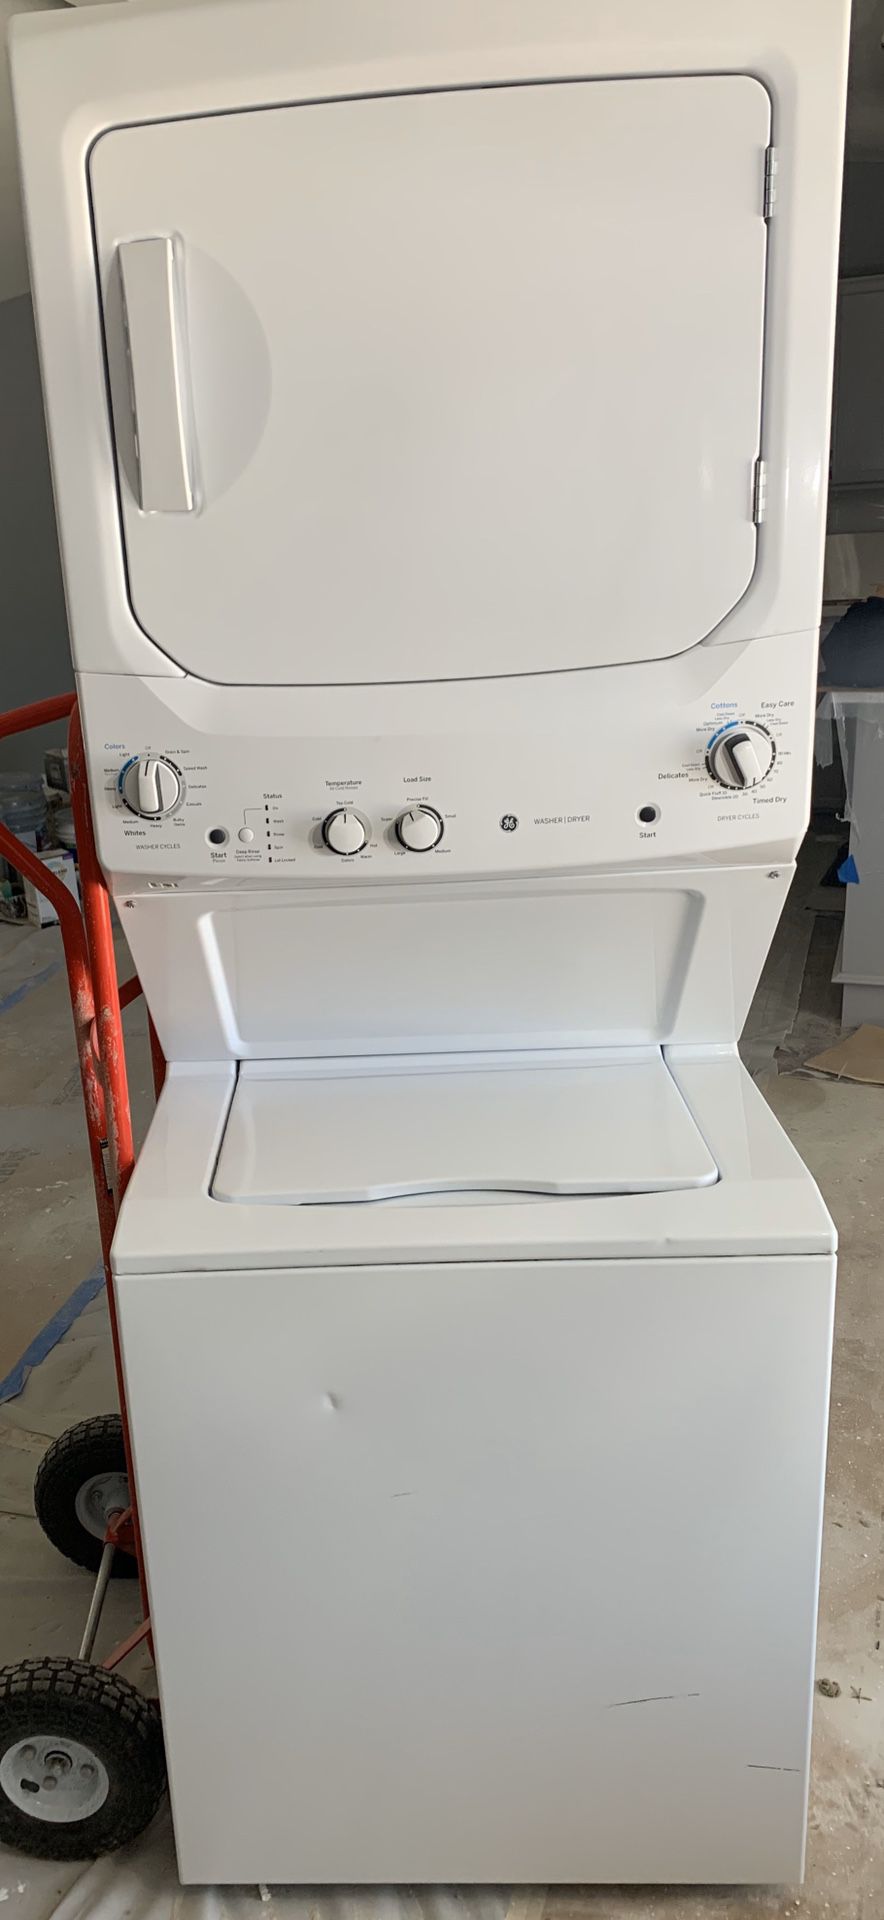 GE 27" Stacked Washer With Gas Dryer (White)